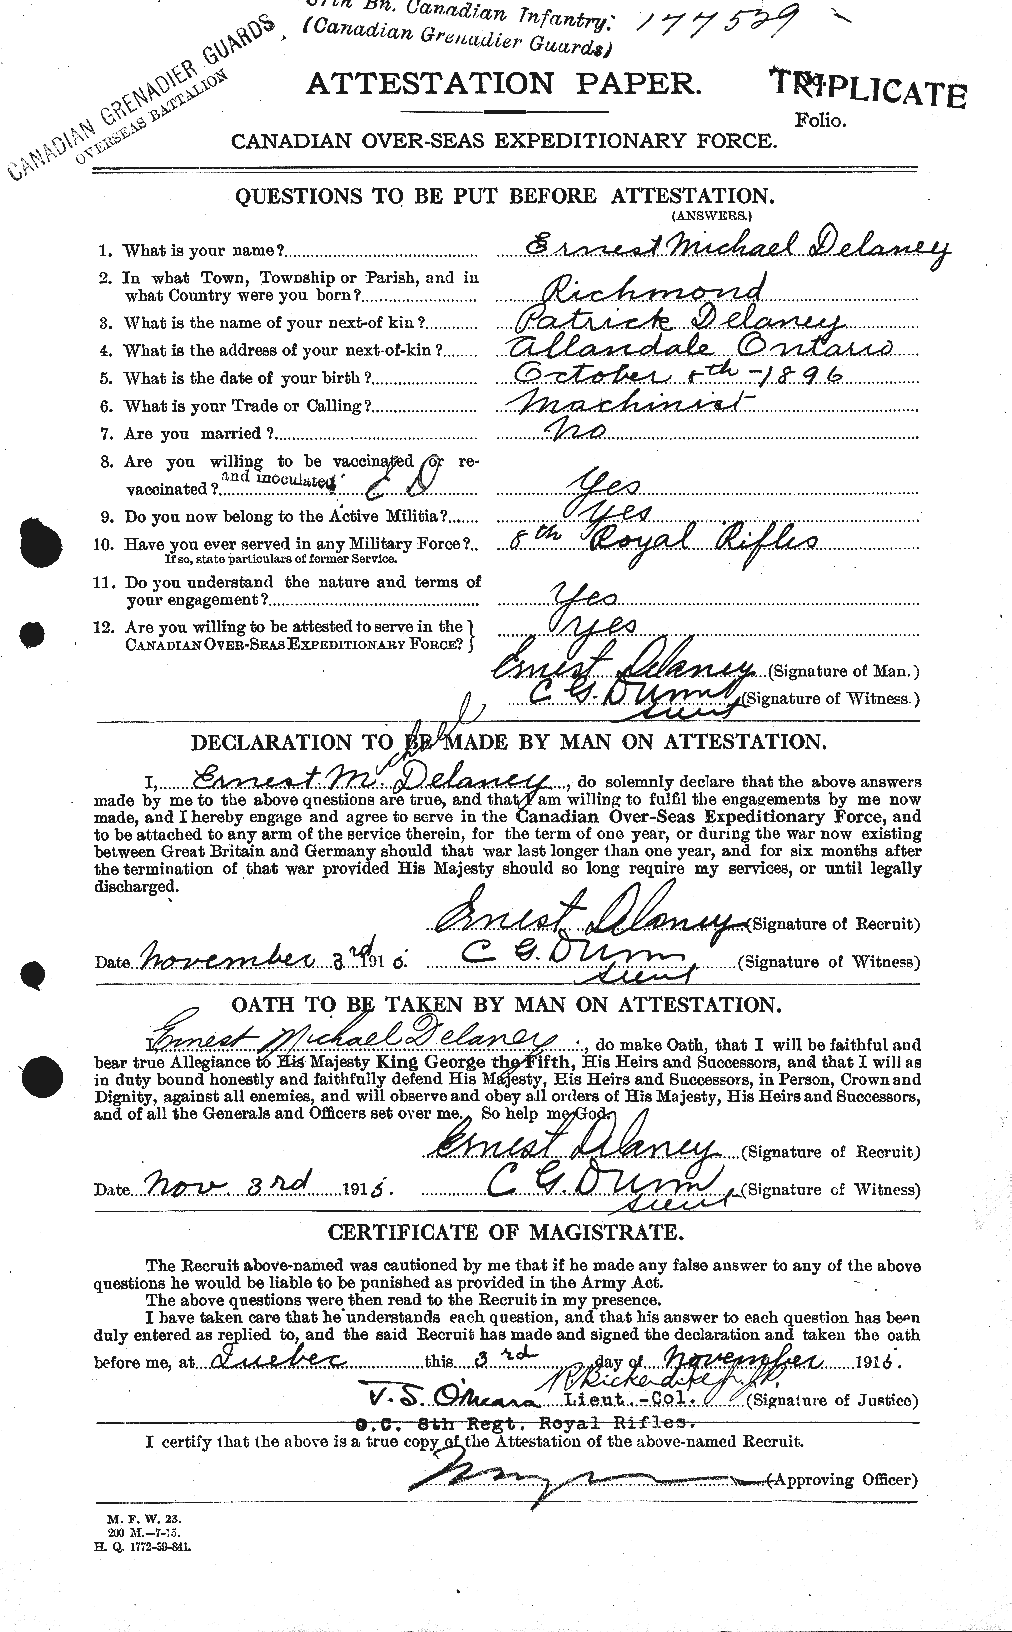 Personnel Records of the First World War - CEF 288496a